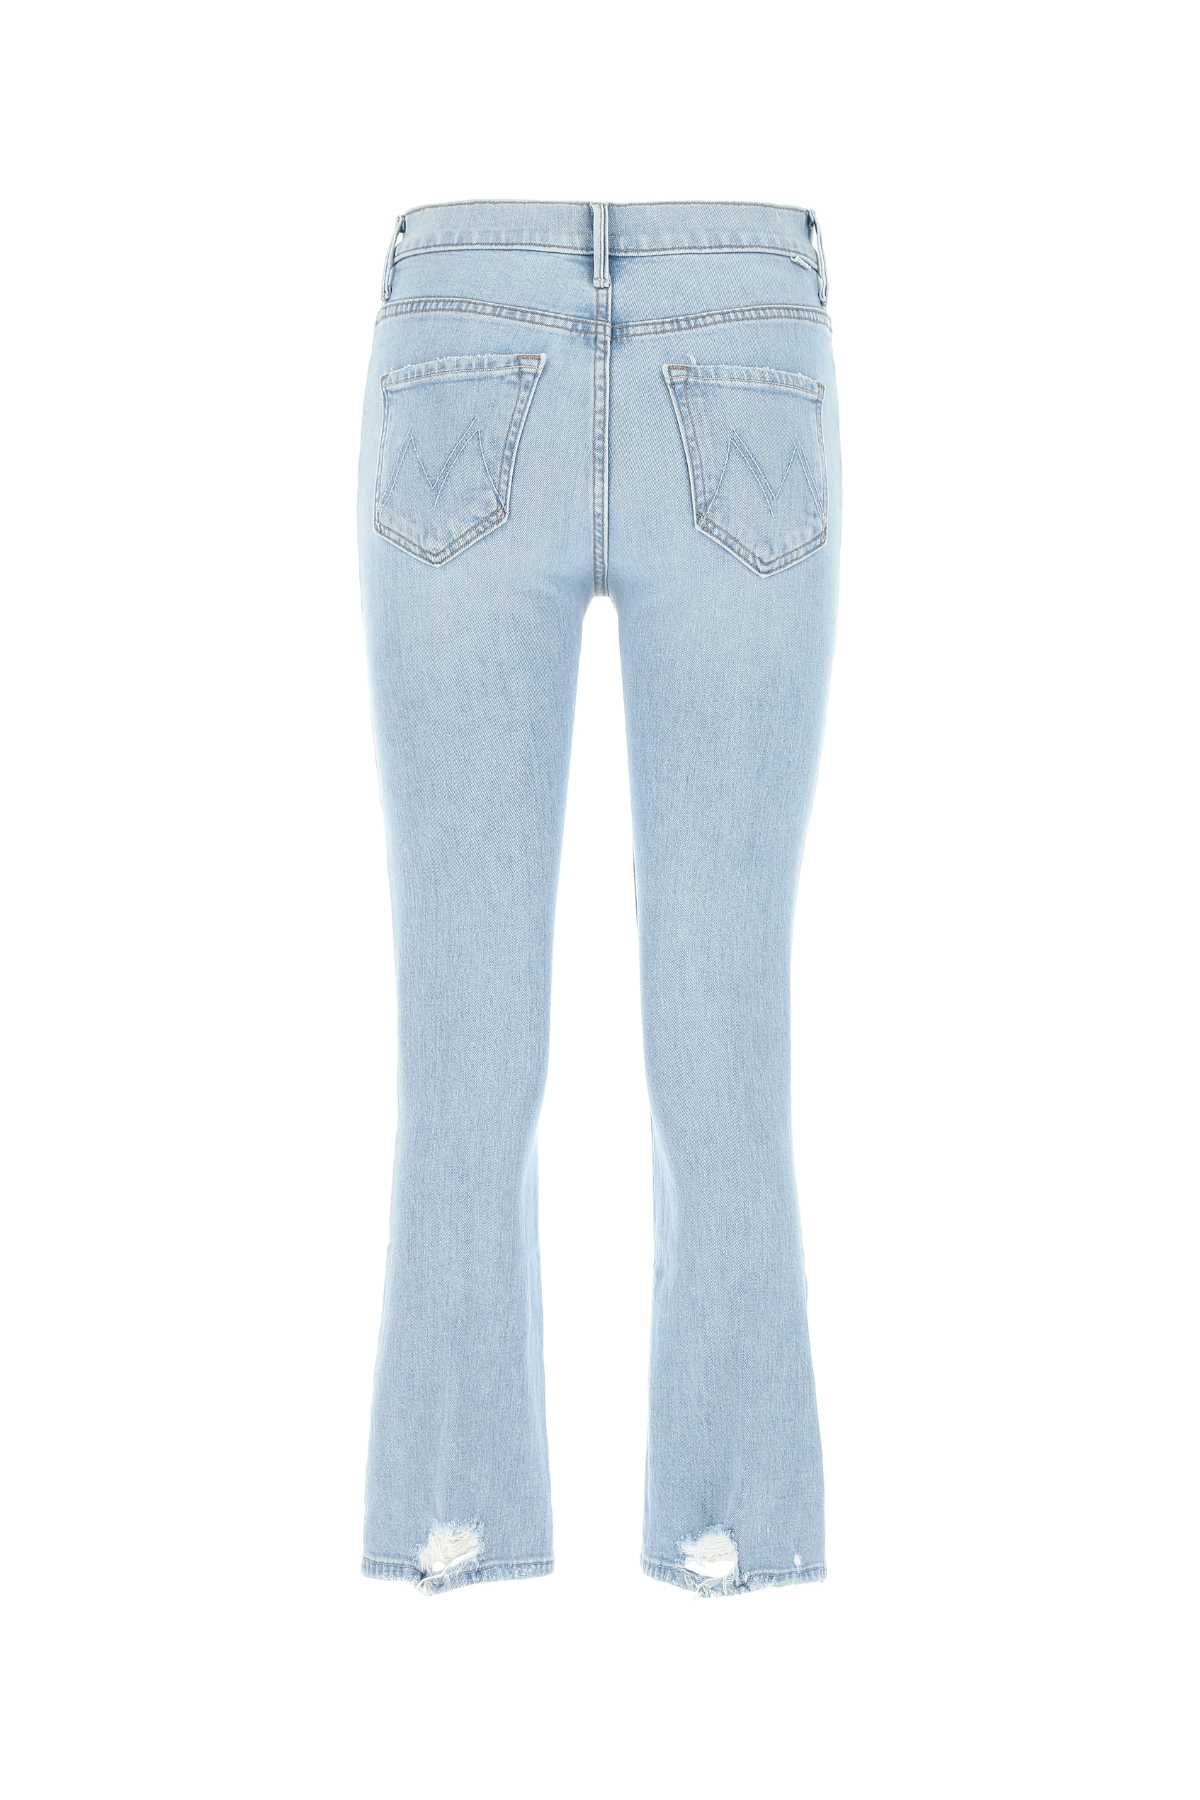 Mother Stretch Denim The Insider Crop Step Chew Jeans In Mlh